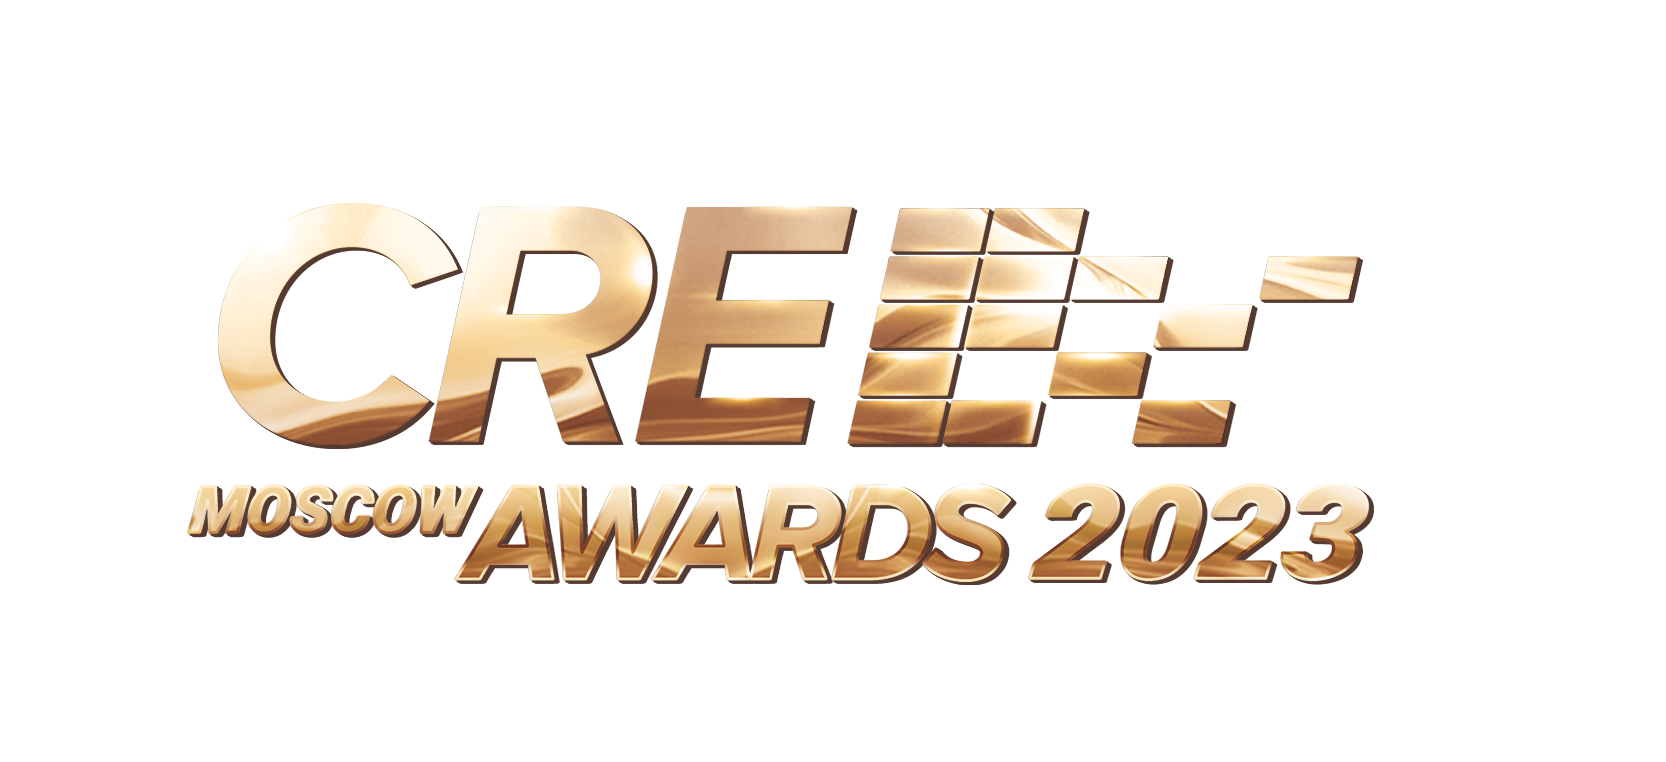 CRE MOSCOW AWARDS 2023